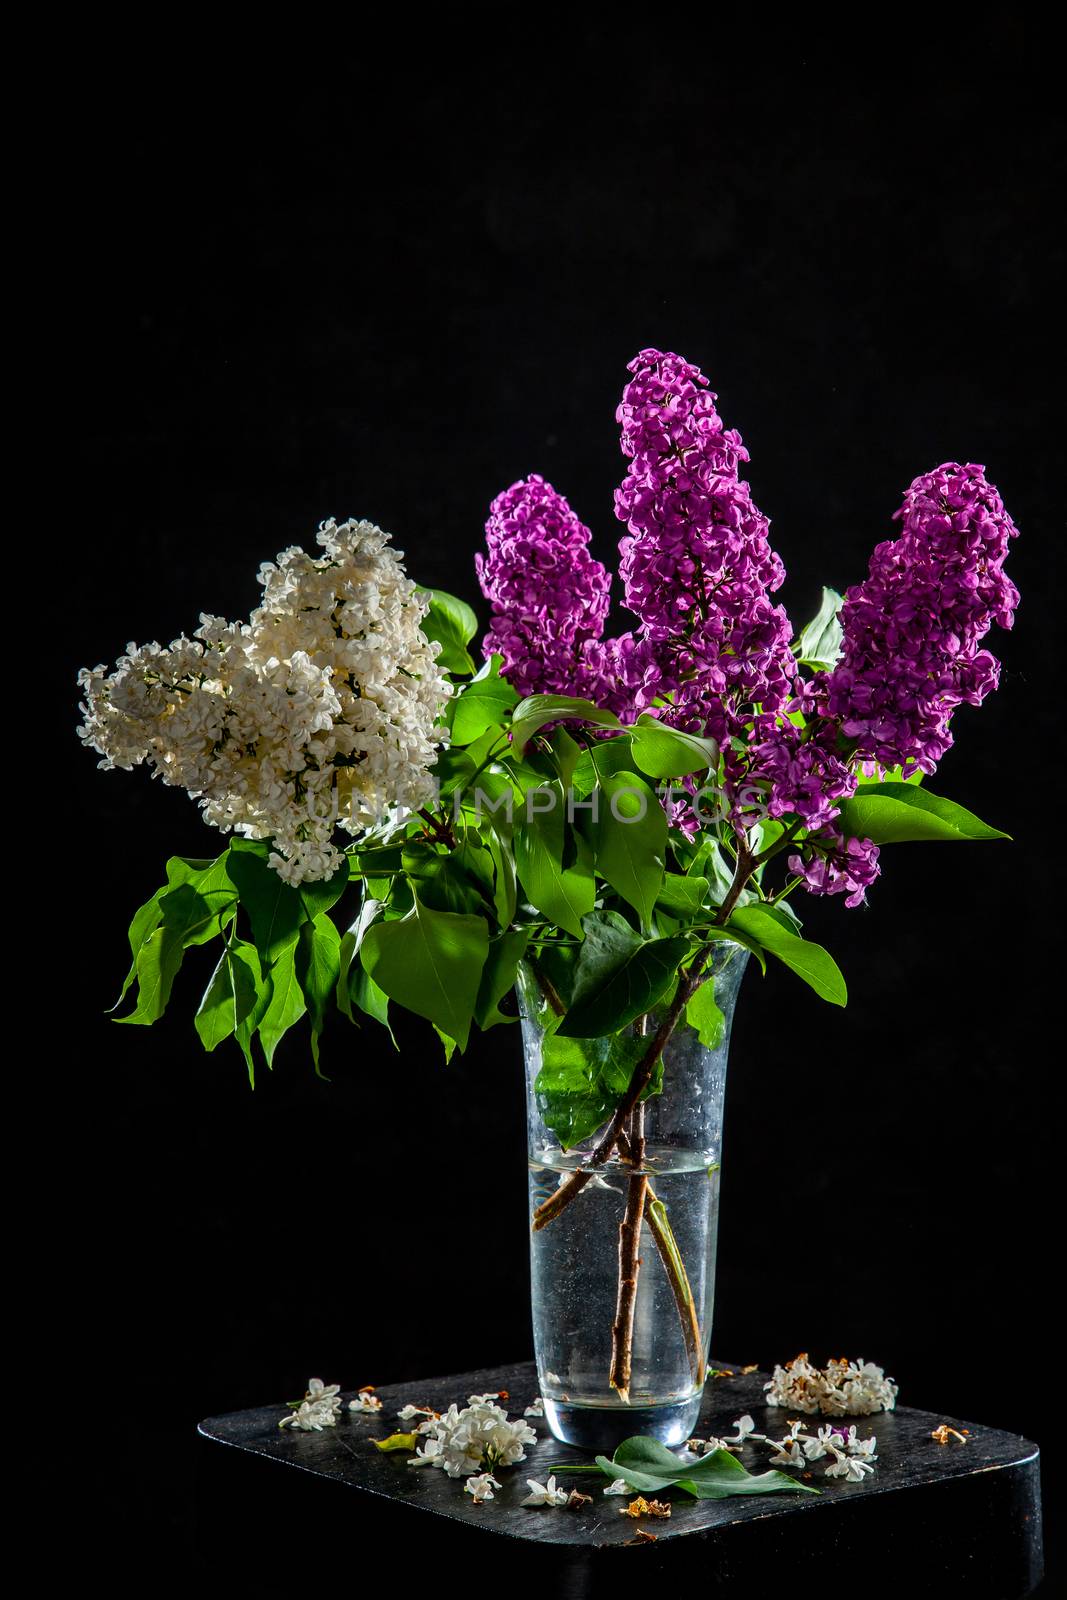 Branches of white and purple  lilac in glass vase on black background. Spring branch of blooming lilac on the table with black background. Fallen lilac flowers on the table.